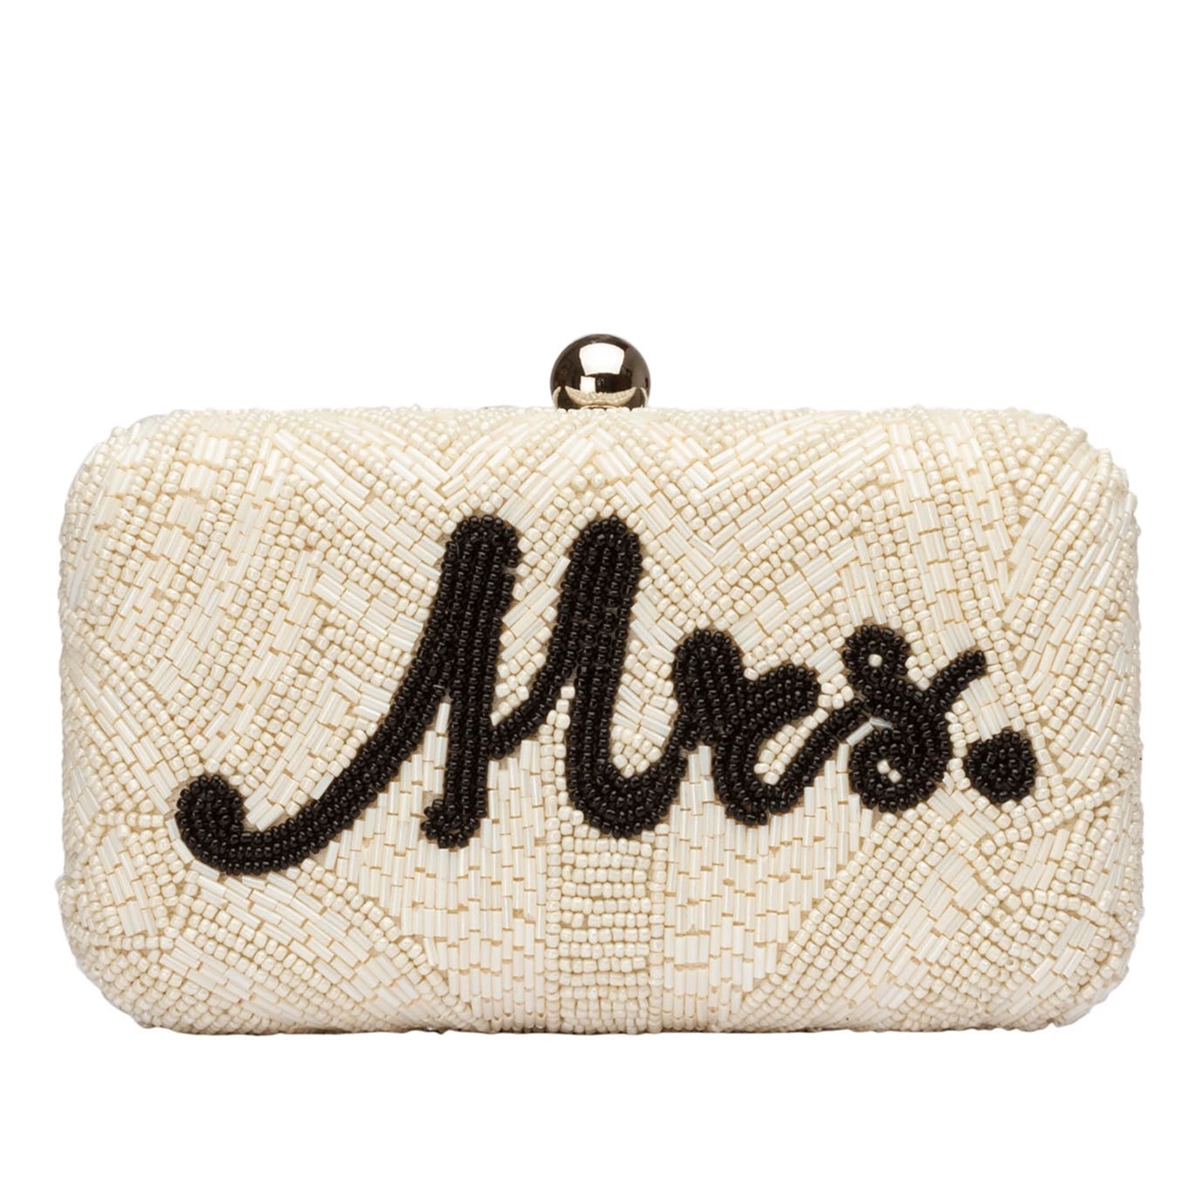 Bridal Clutch Bags for Every Budget: 23 Styles From High Street to Designer  - hitched.co.uk